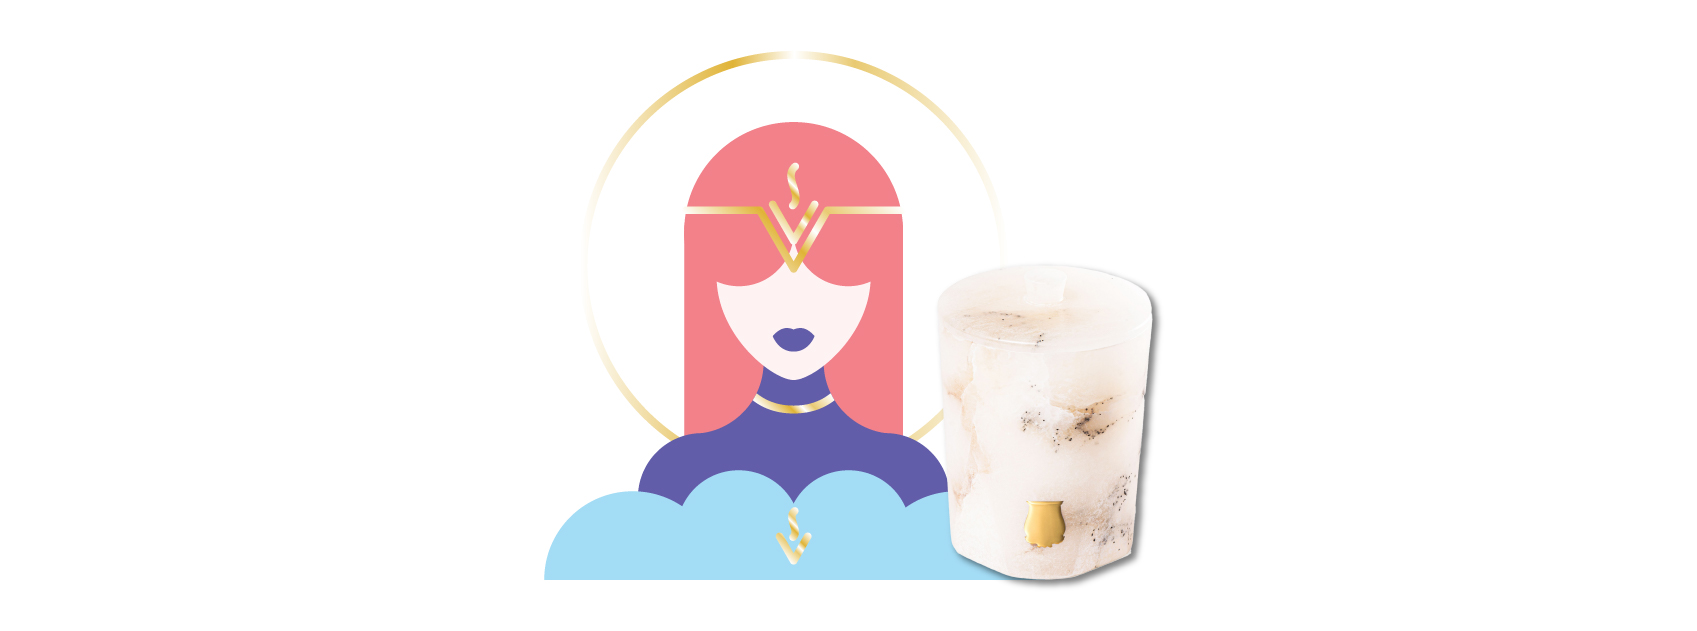 vesta alabaster candle by cire trudon with an illustration of vesta the goddess